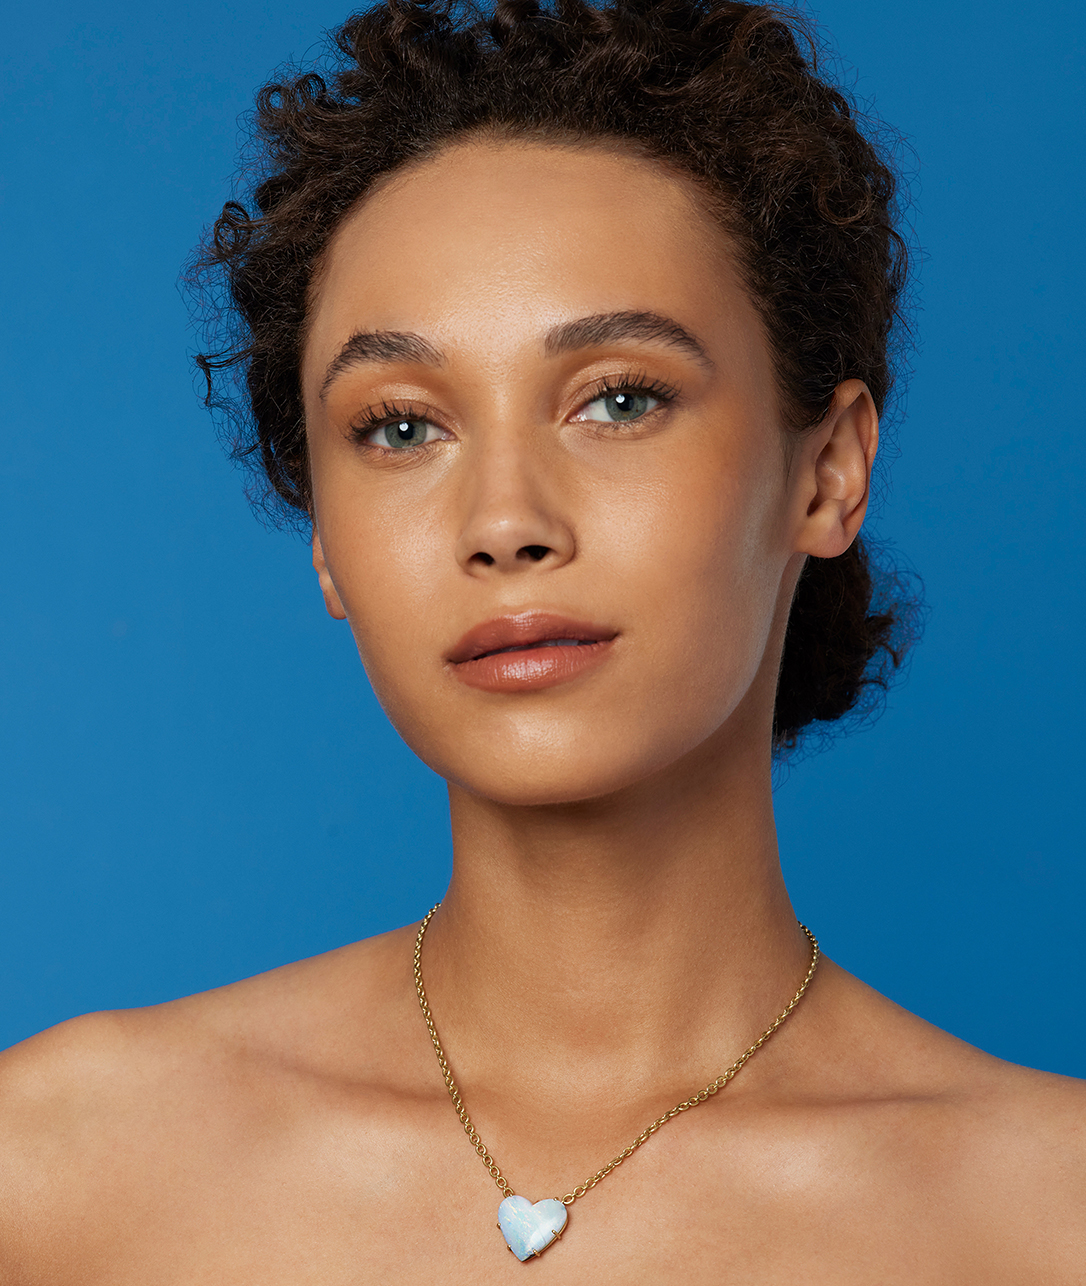 When a hand-carved, heart-shaped One of a Kind Love Necklace is finally available in her very favorite stone, that's amore.SHOP LOVE COLLECTION